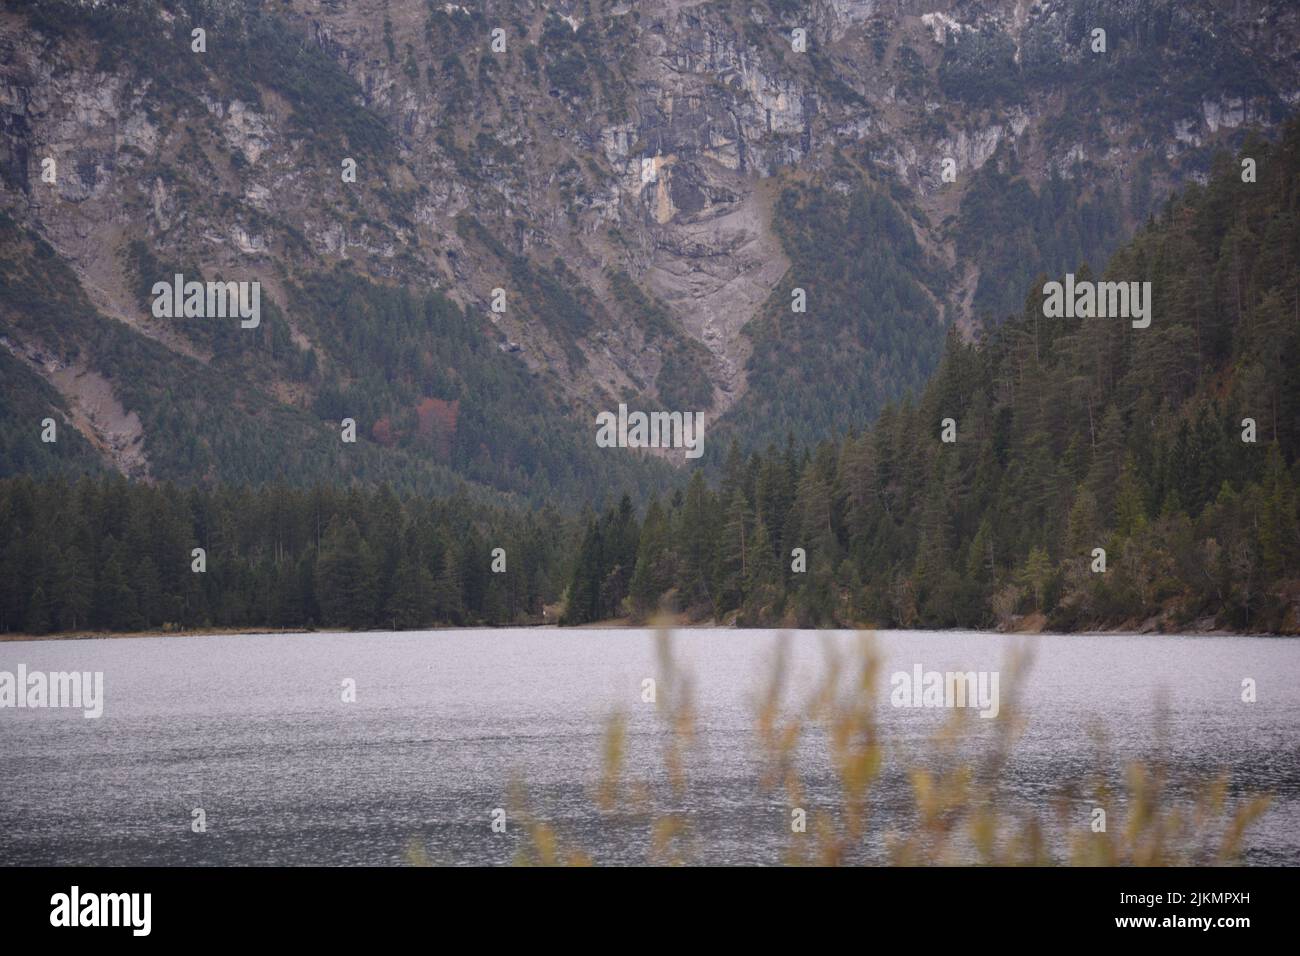 A scenic view of Plansee lake in Austria with pine tree forest and rocky mountain in the background Stock Photo